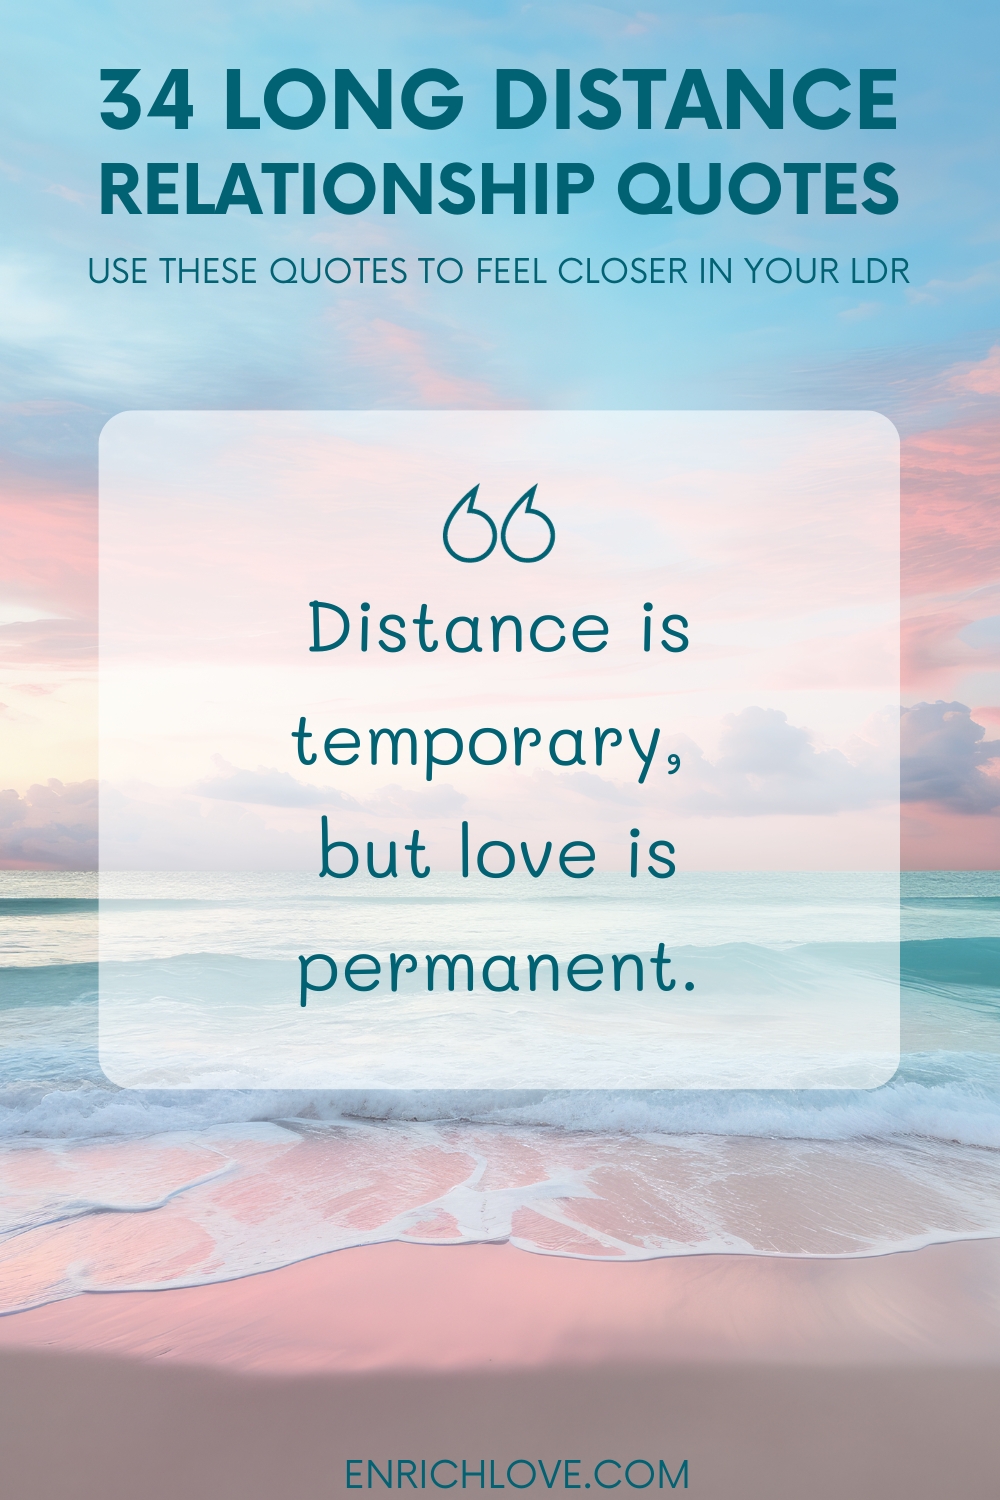 34 Long Distance Relationship Quotes - Distance is temporary, but love is permanent.